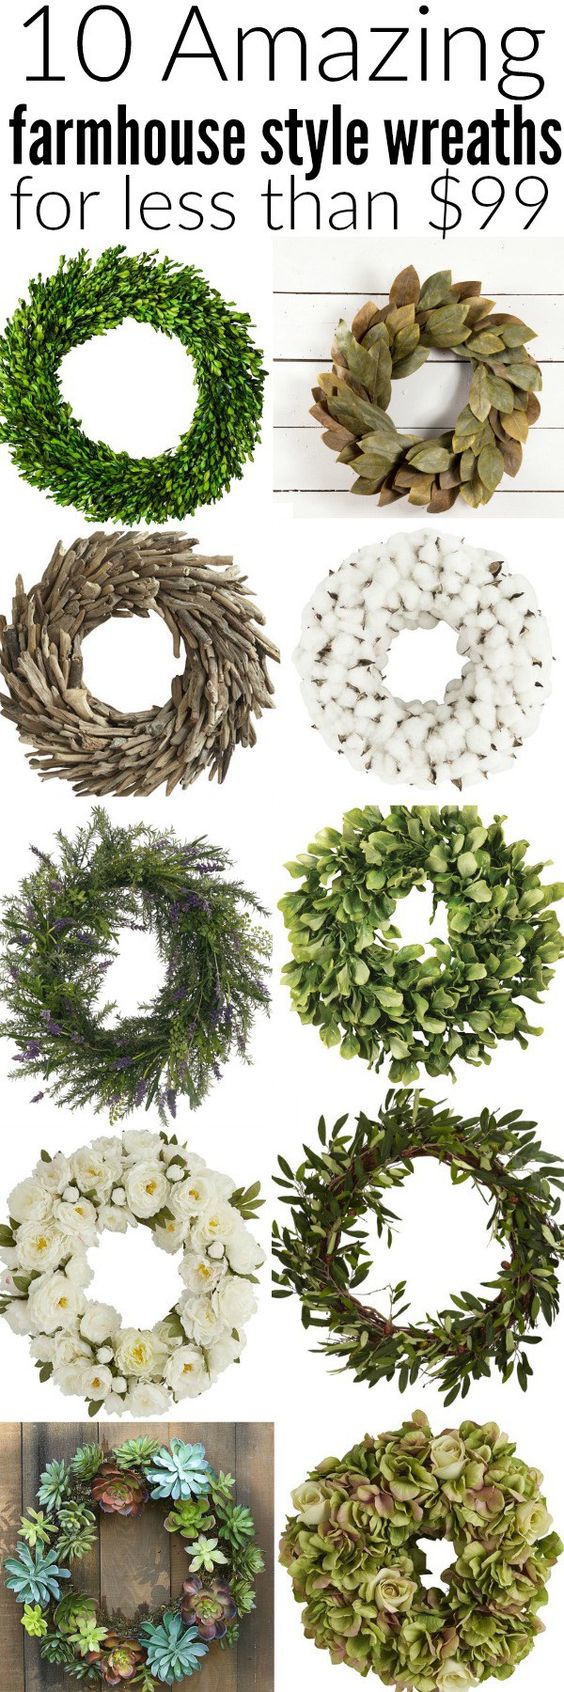 The best farmhouse style wreaths! A must pin if you are shopping for wreaths! They are great for indoors, outdoors, doors, centerpieces, walls, & so much more!!